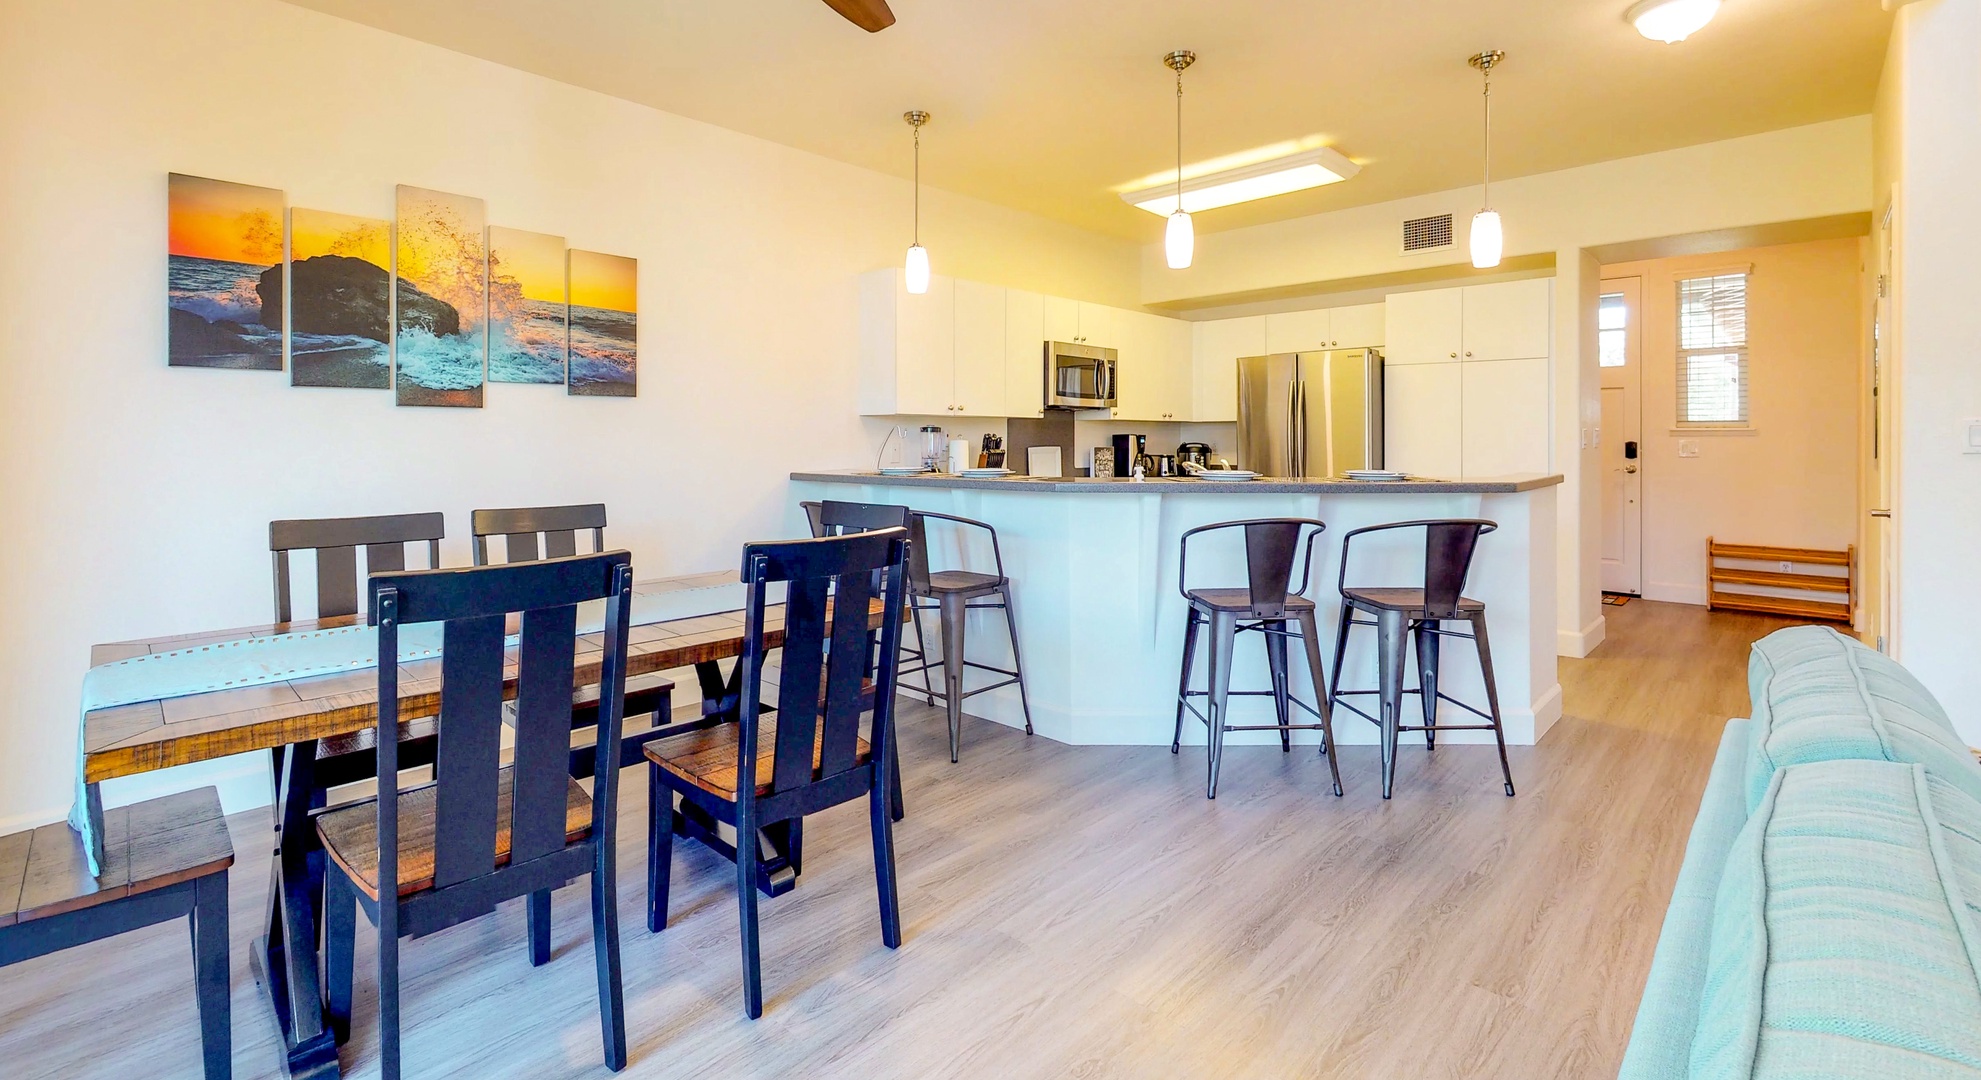 Kapolei Vacation Rentals, Ko Olina Kai 1051D - The breakfast bar opens up to the dining and living room area.